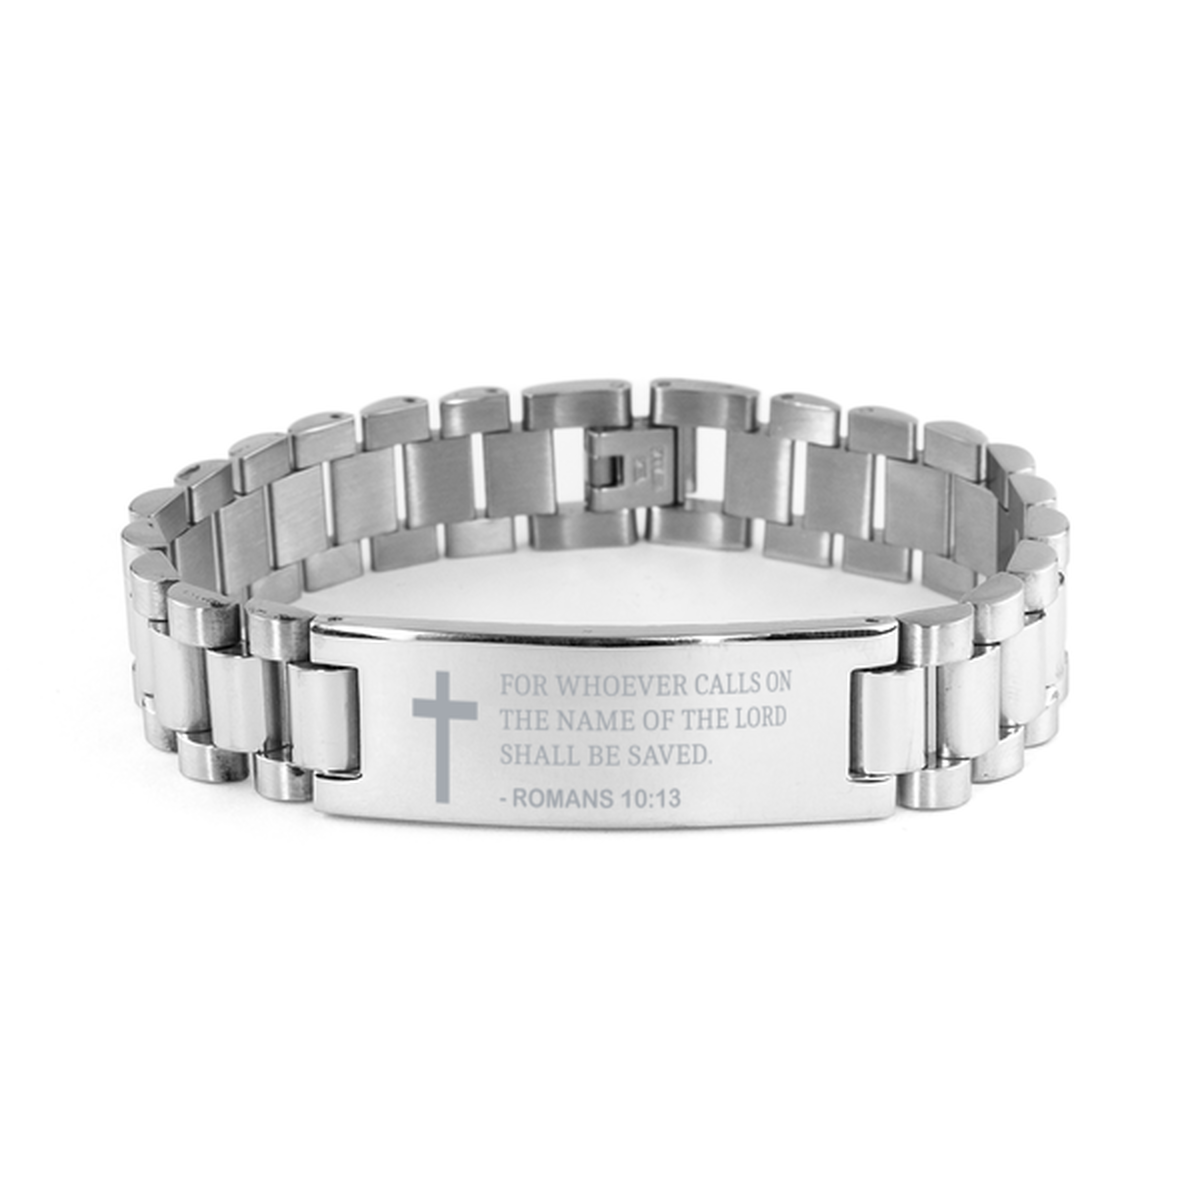 Christian Ladder Stainless Steel Bracelet, Romans 10:13 For Whoever Calls On The Name Of The Lord Shall, Motivational Bible Verse Gifts For Men Women